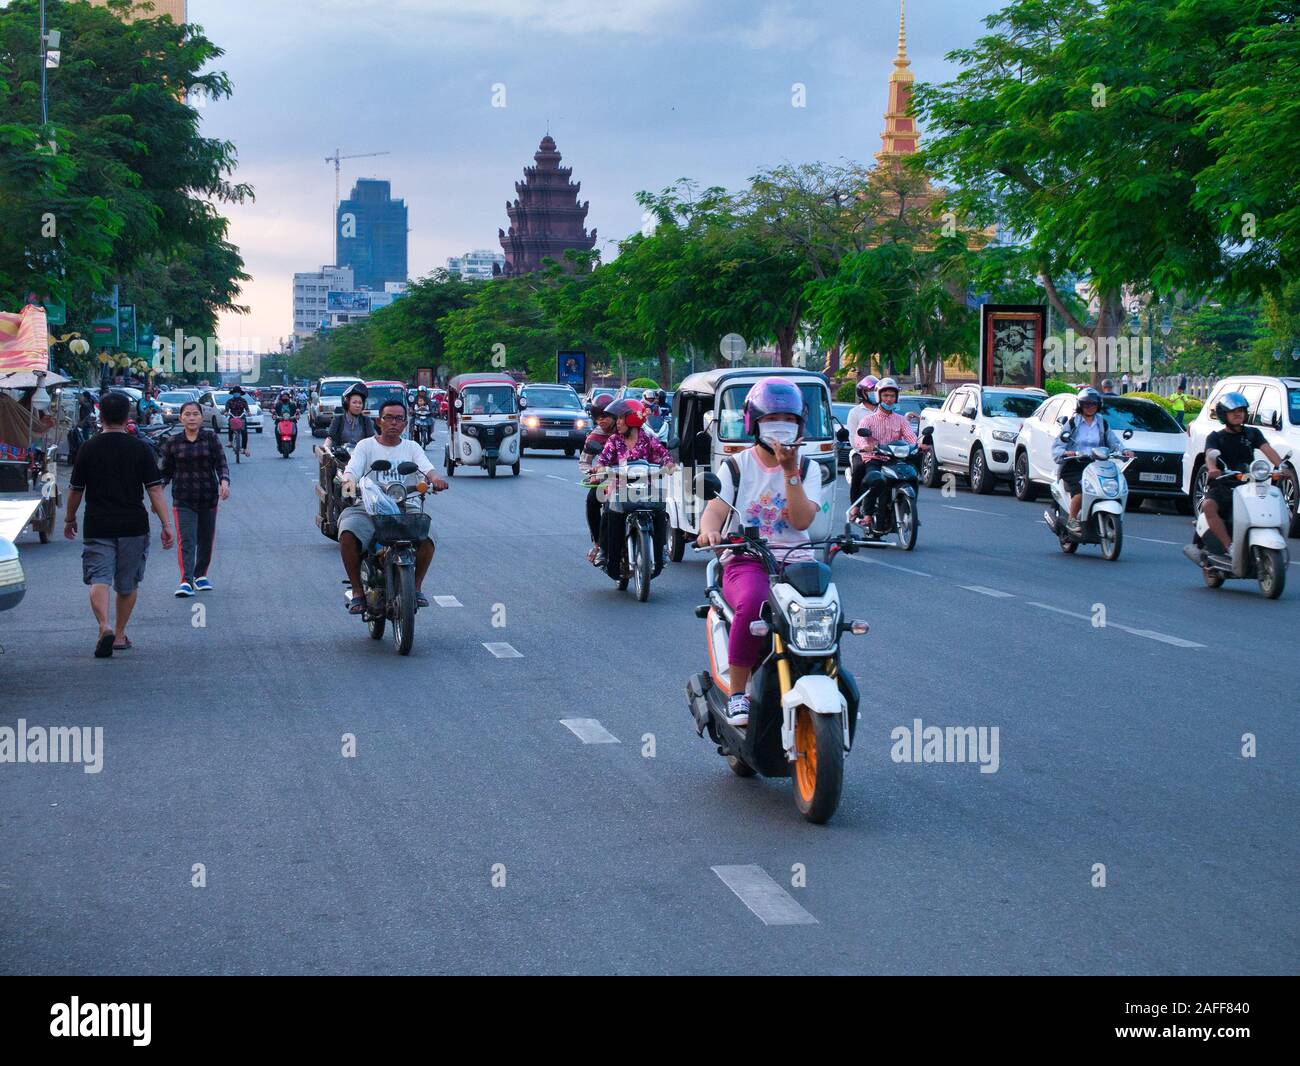 Evening traffic on Preah Sihanouk Blvd near the Norodom Sihanouk Memorial, which appears in the background. Stock Photo